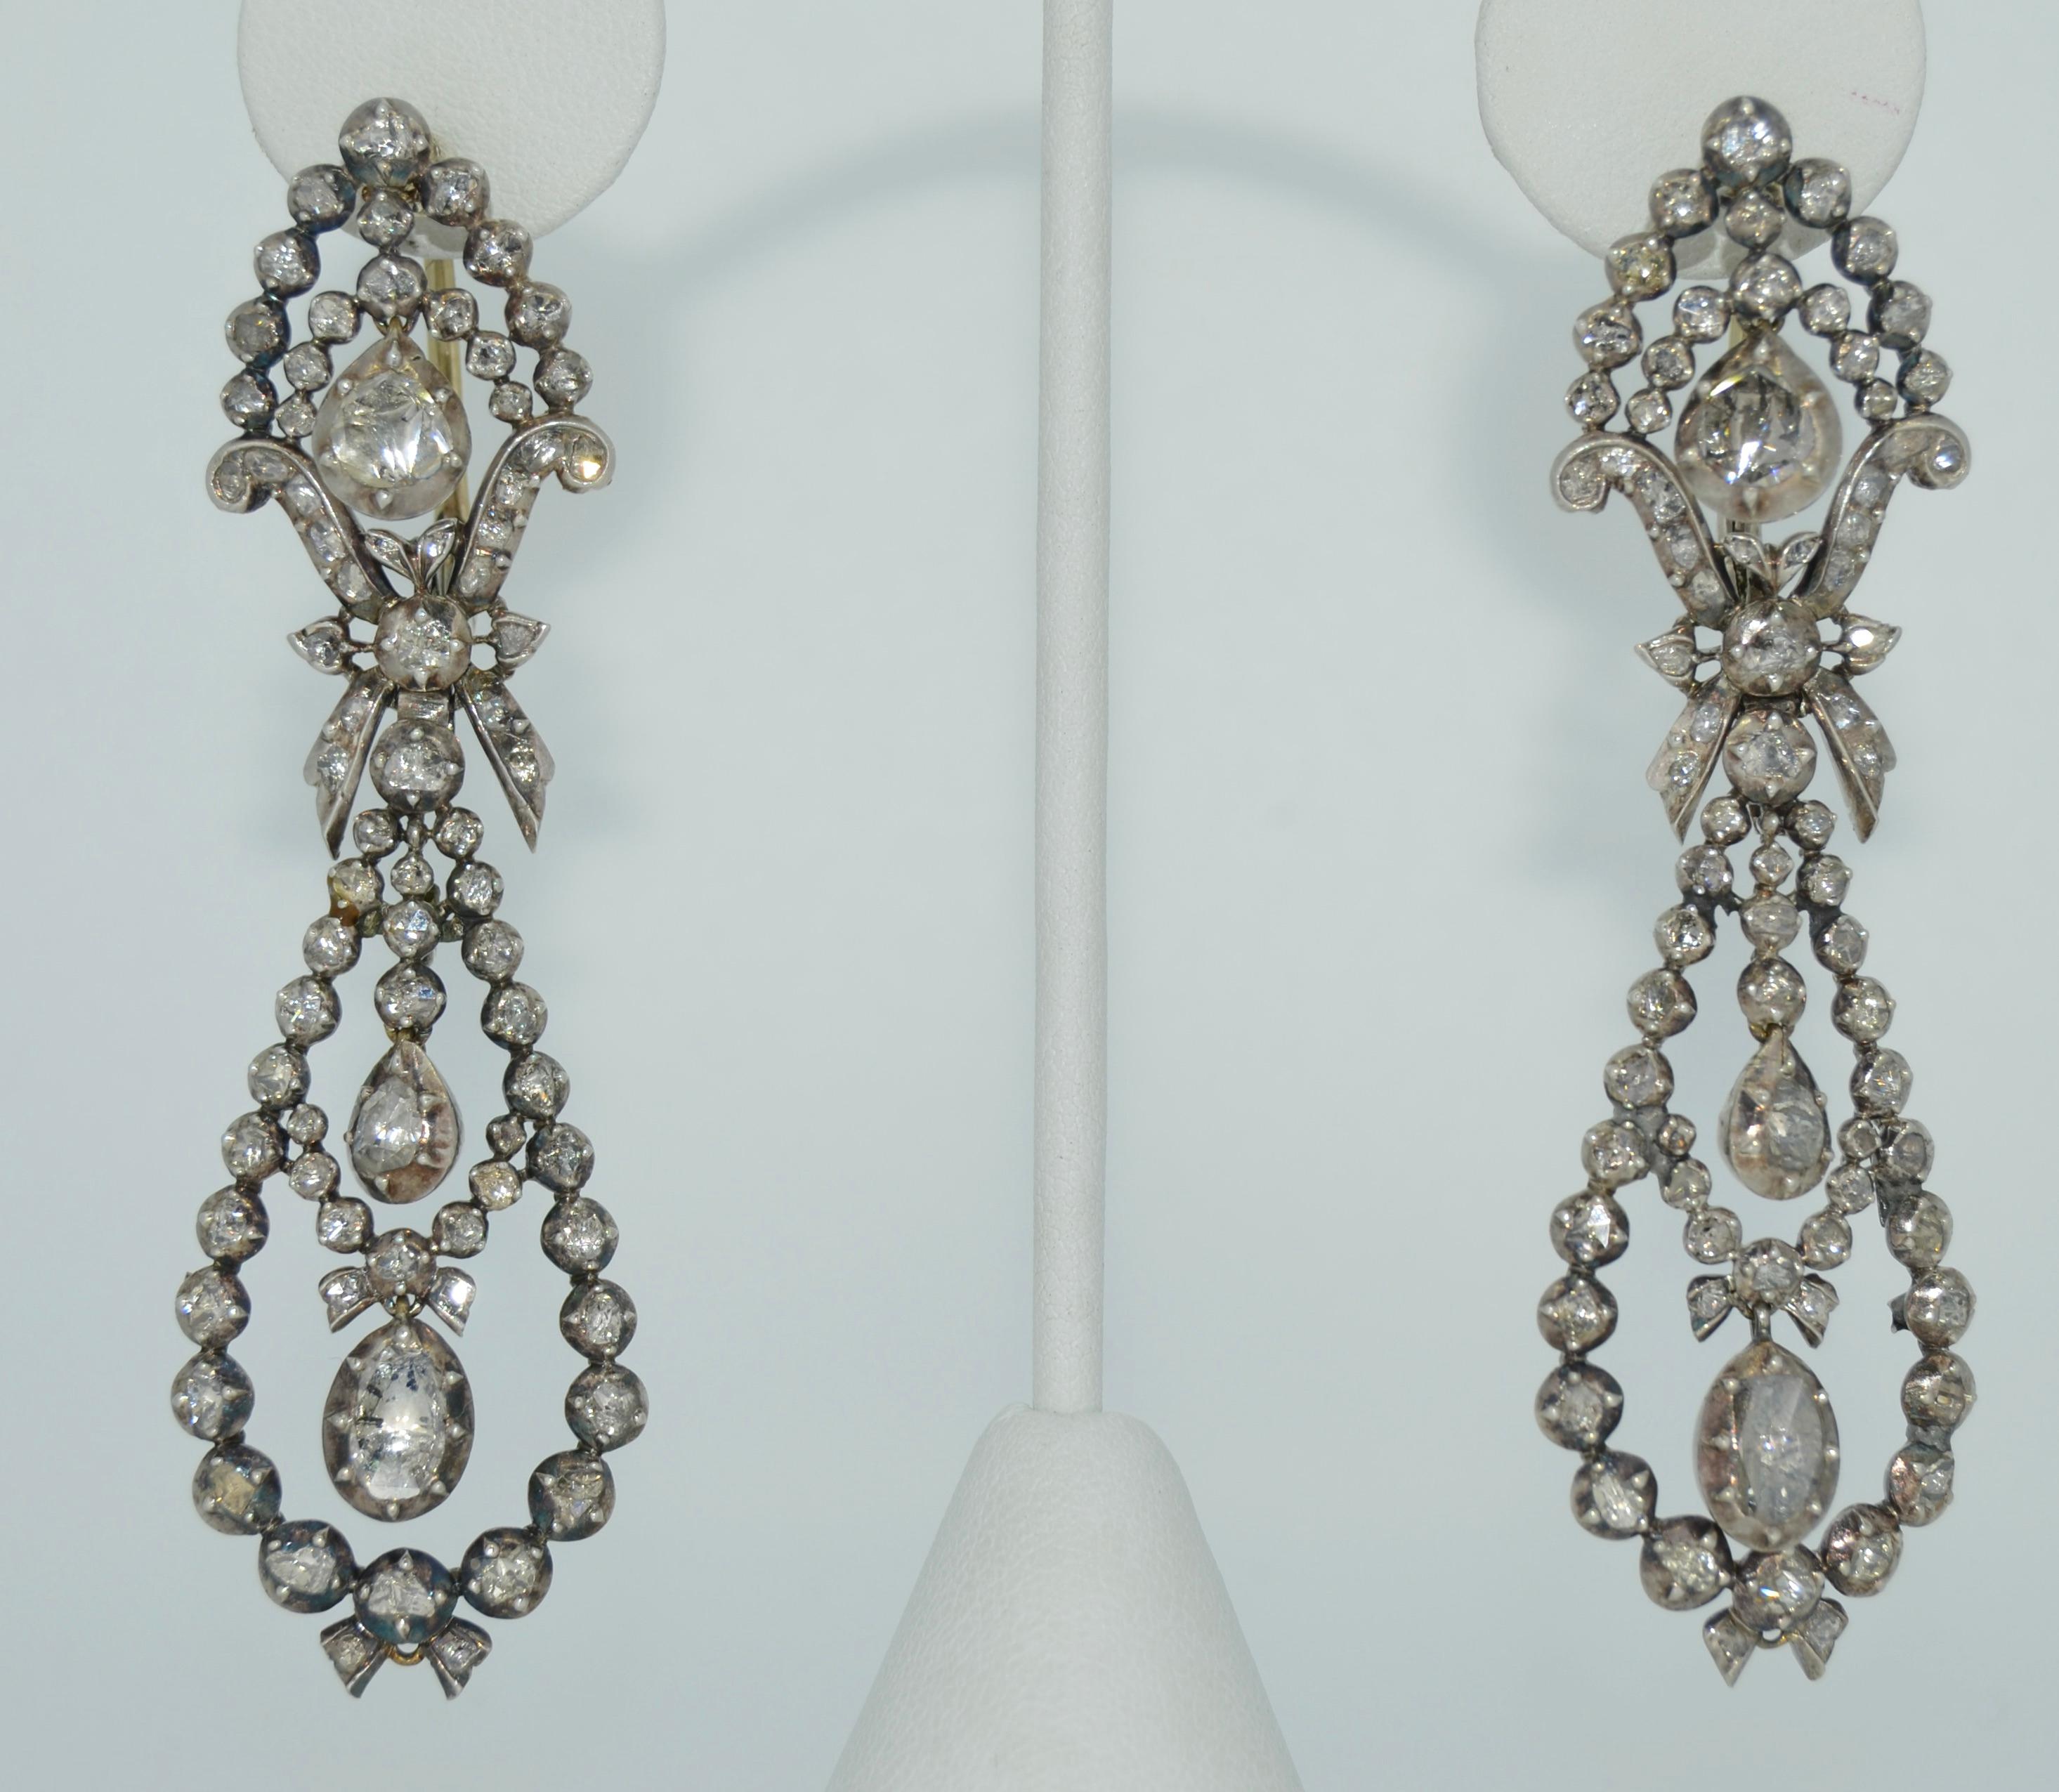 These are a spectacular pair of Georgian Era Pendant Day and Night Earrings. They are crafted from sterling silver with 14K ear wires. These earrings are covered in rose cut diamonds, all presented and accounted for. The top of the ear wires are